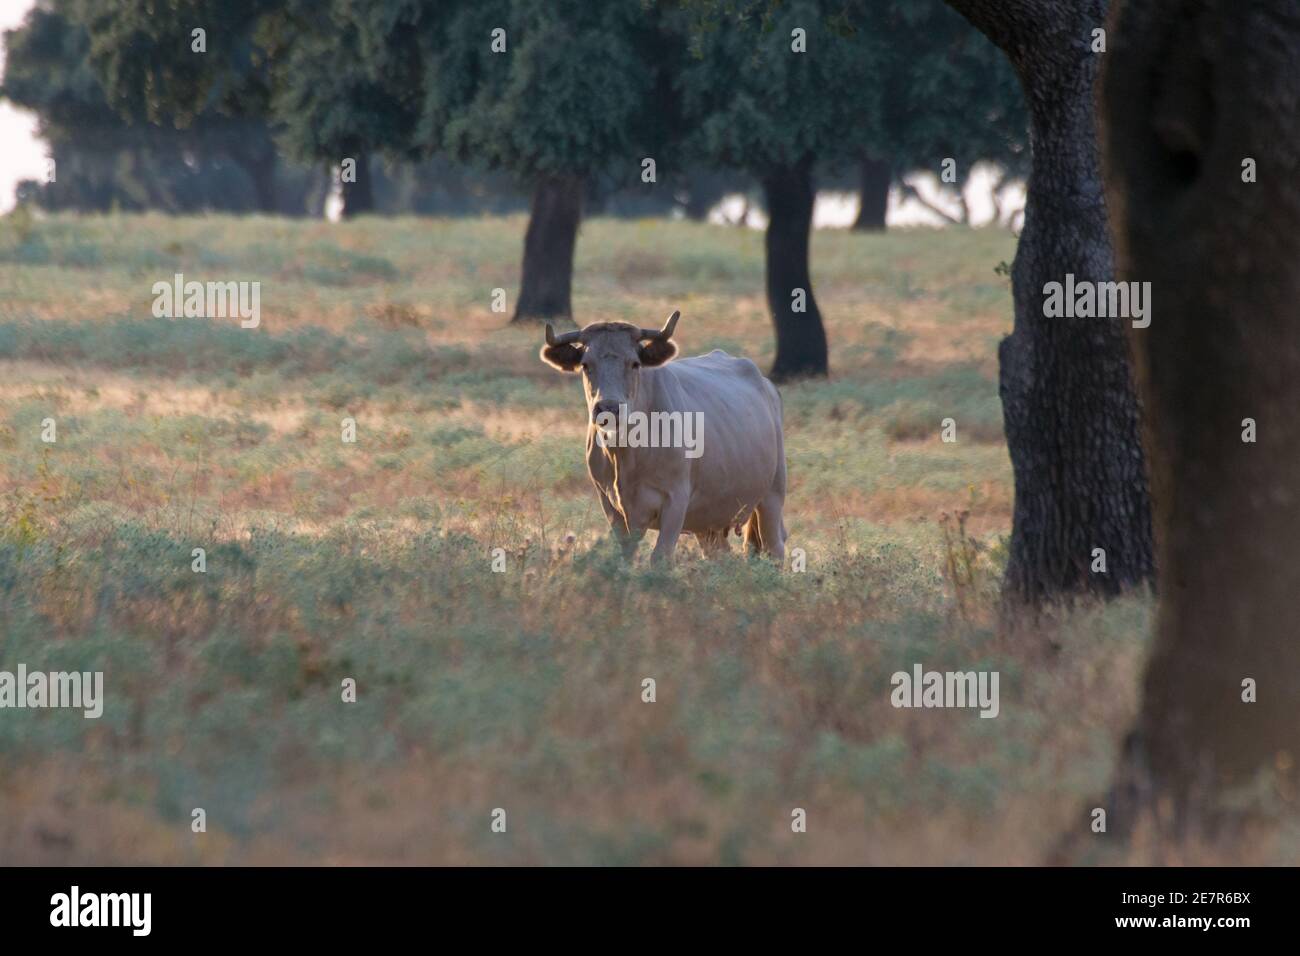 Closeup of a Charolais cattle surrounded by trees in Spanish Dehesa, Salamanca, Spain Stock Photo